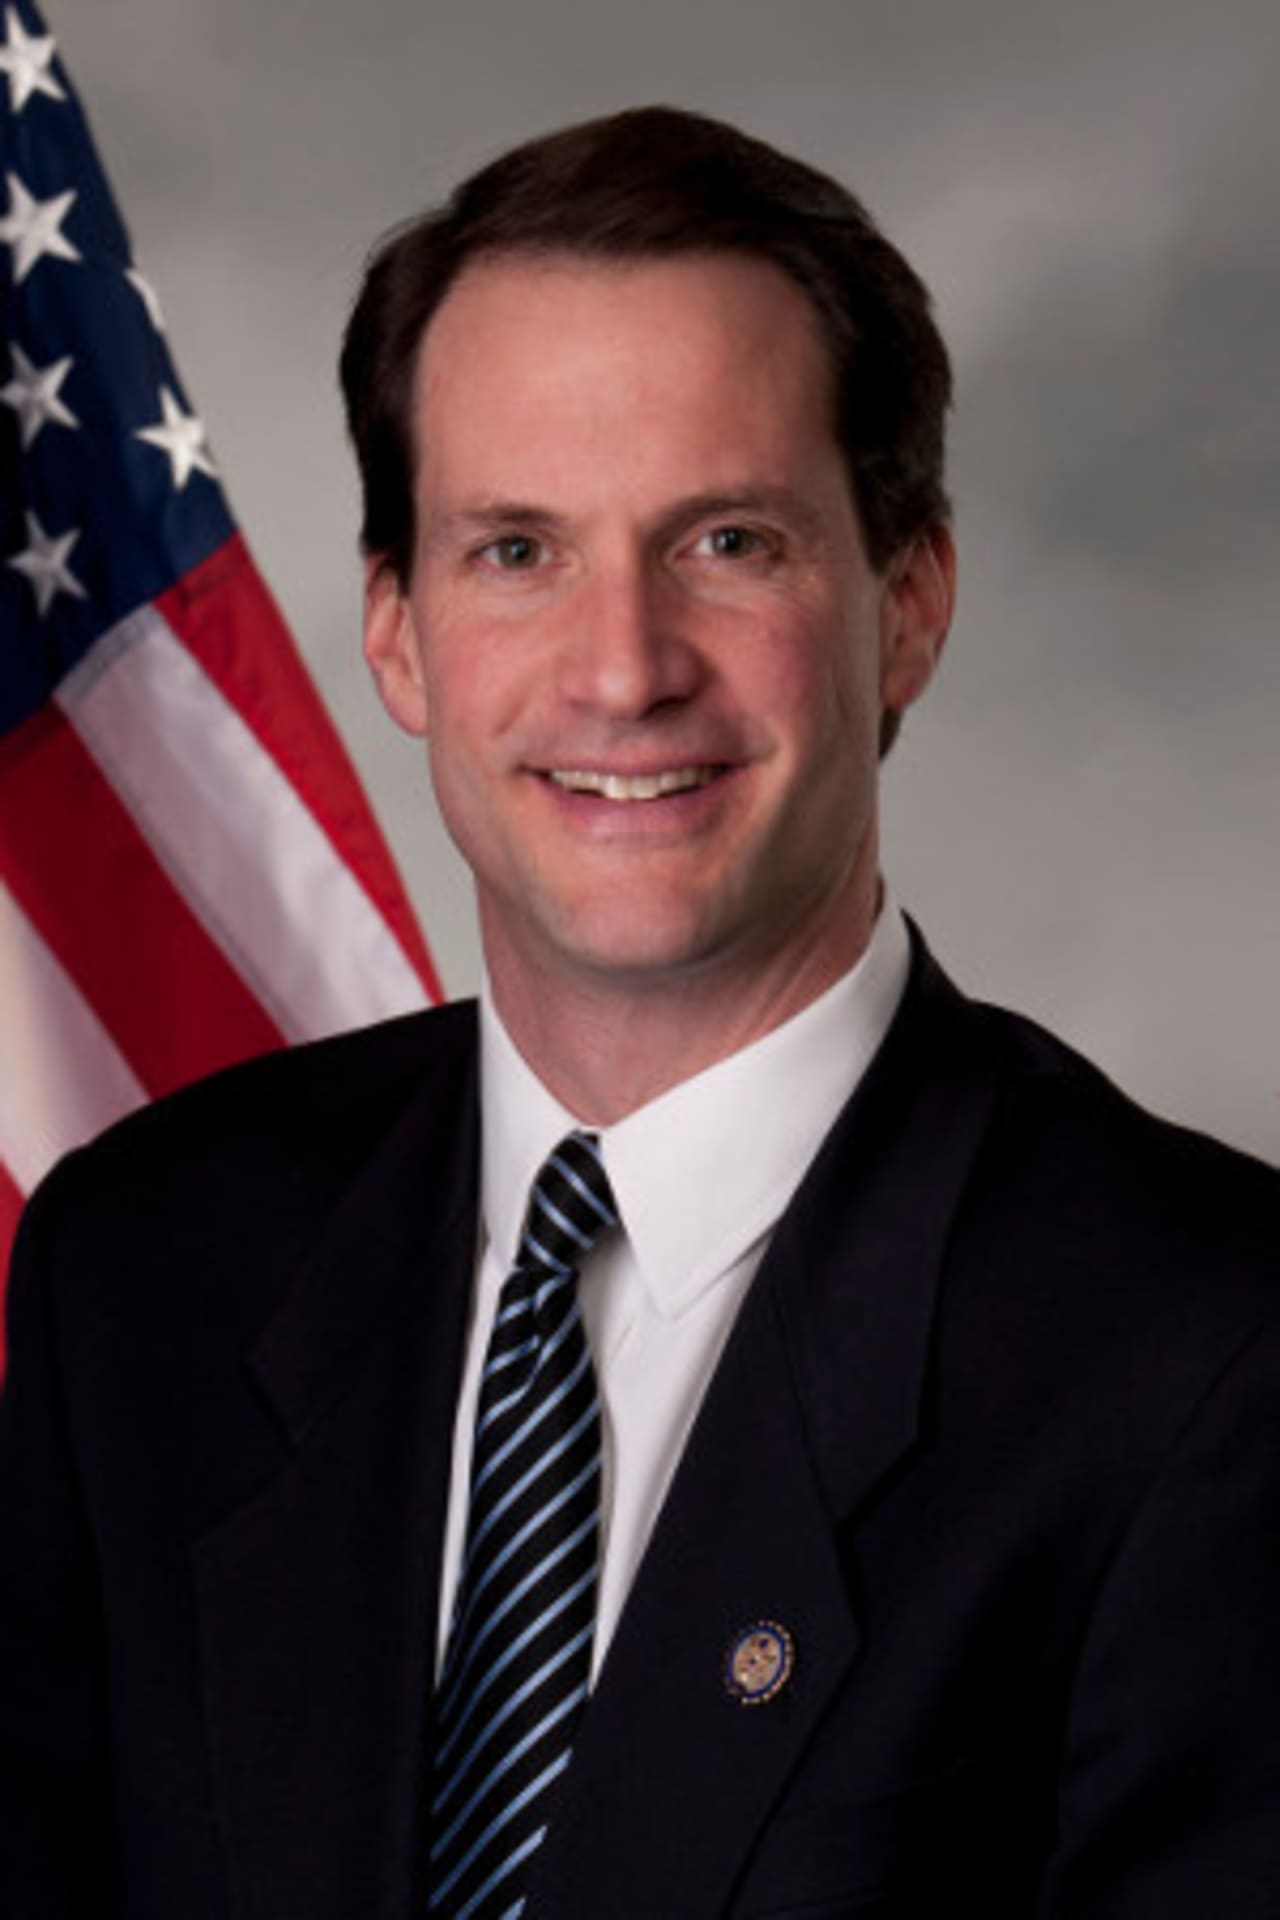 Congressman Jim Himes  launches an eight-town tour to discuss health care reform with seniors.